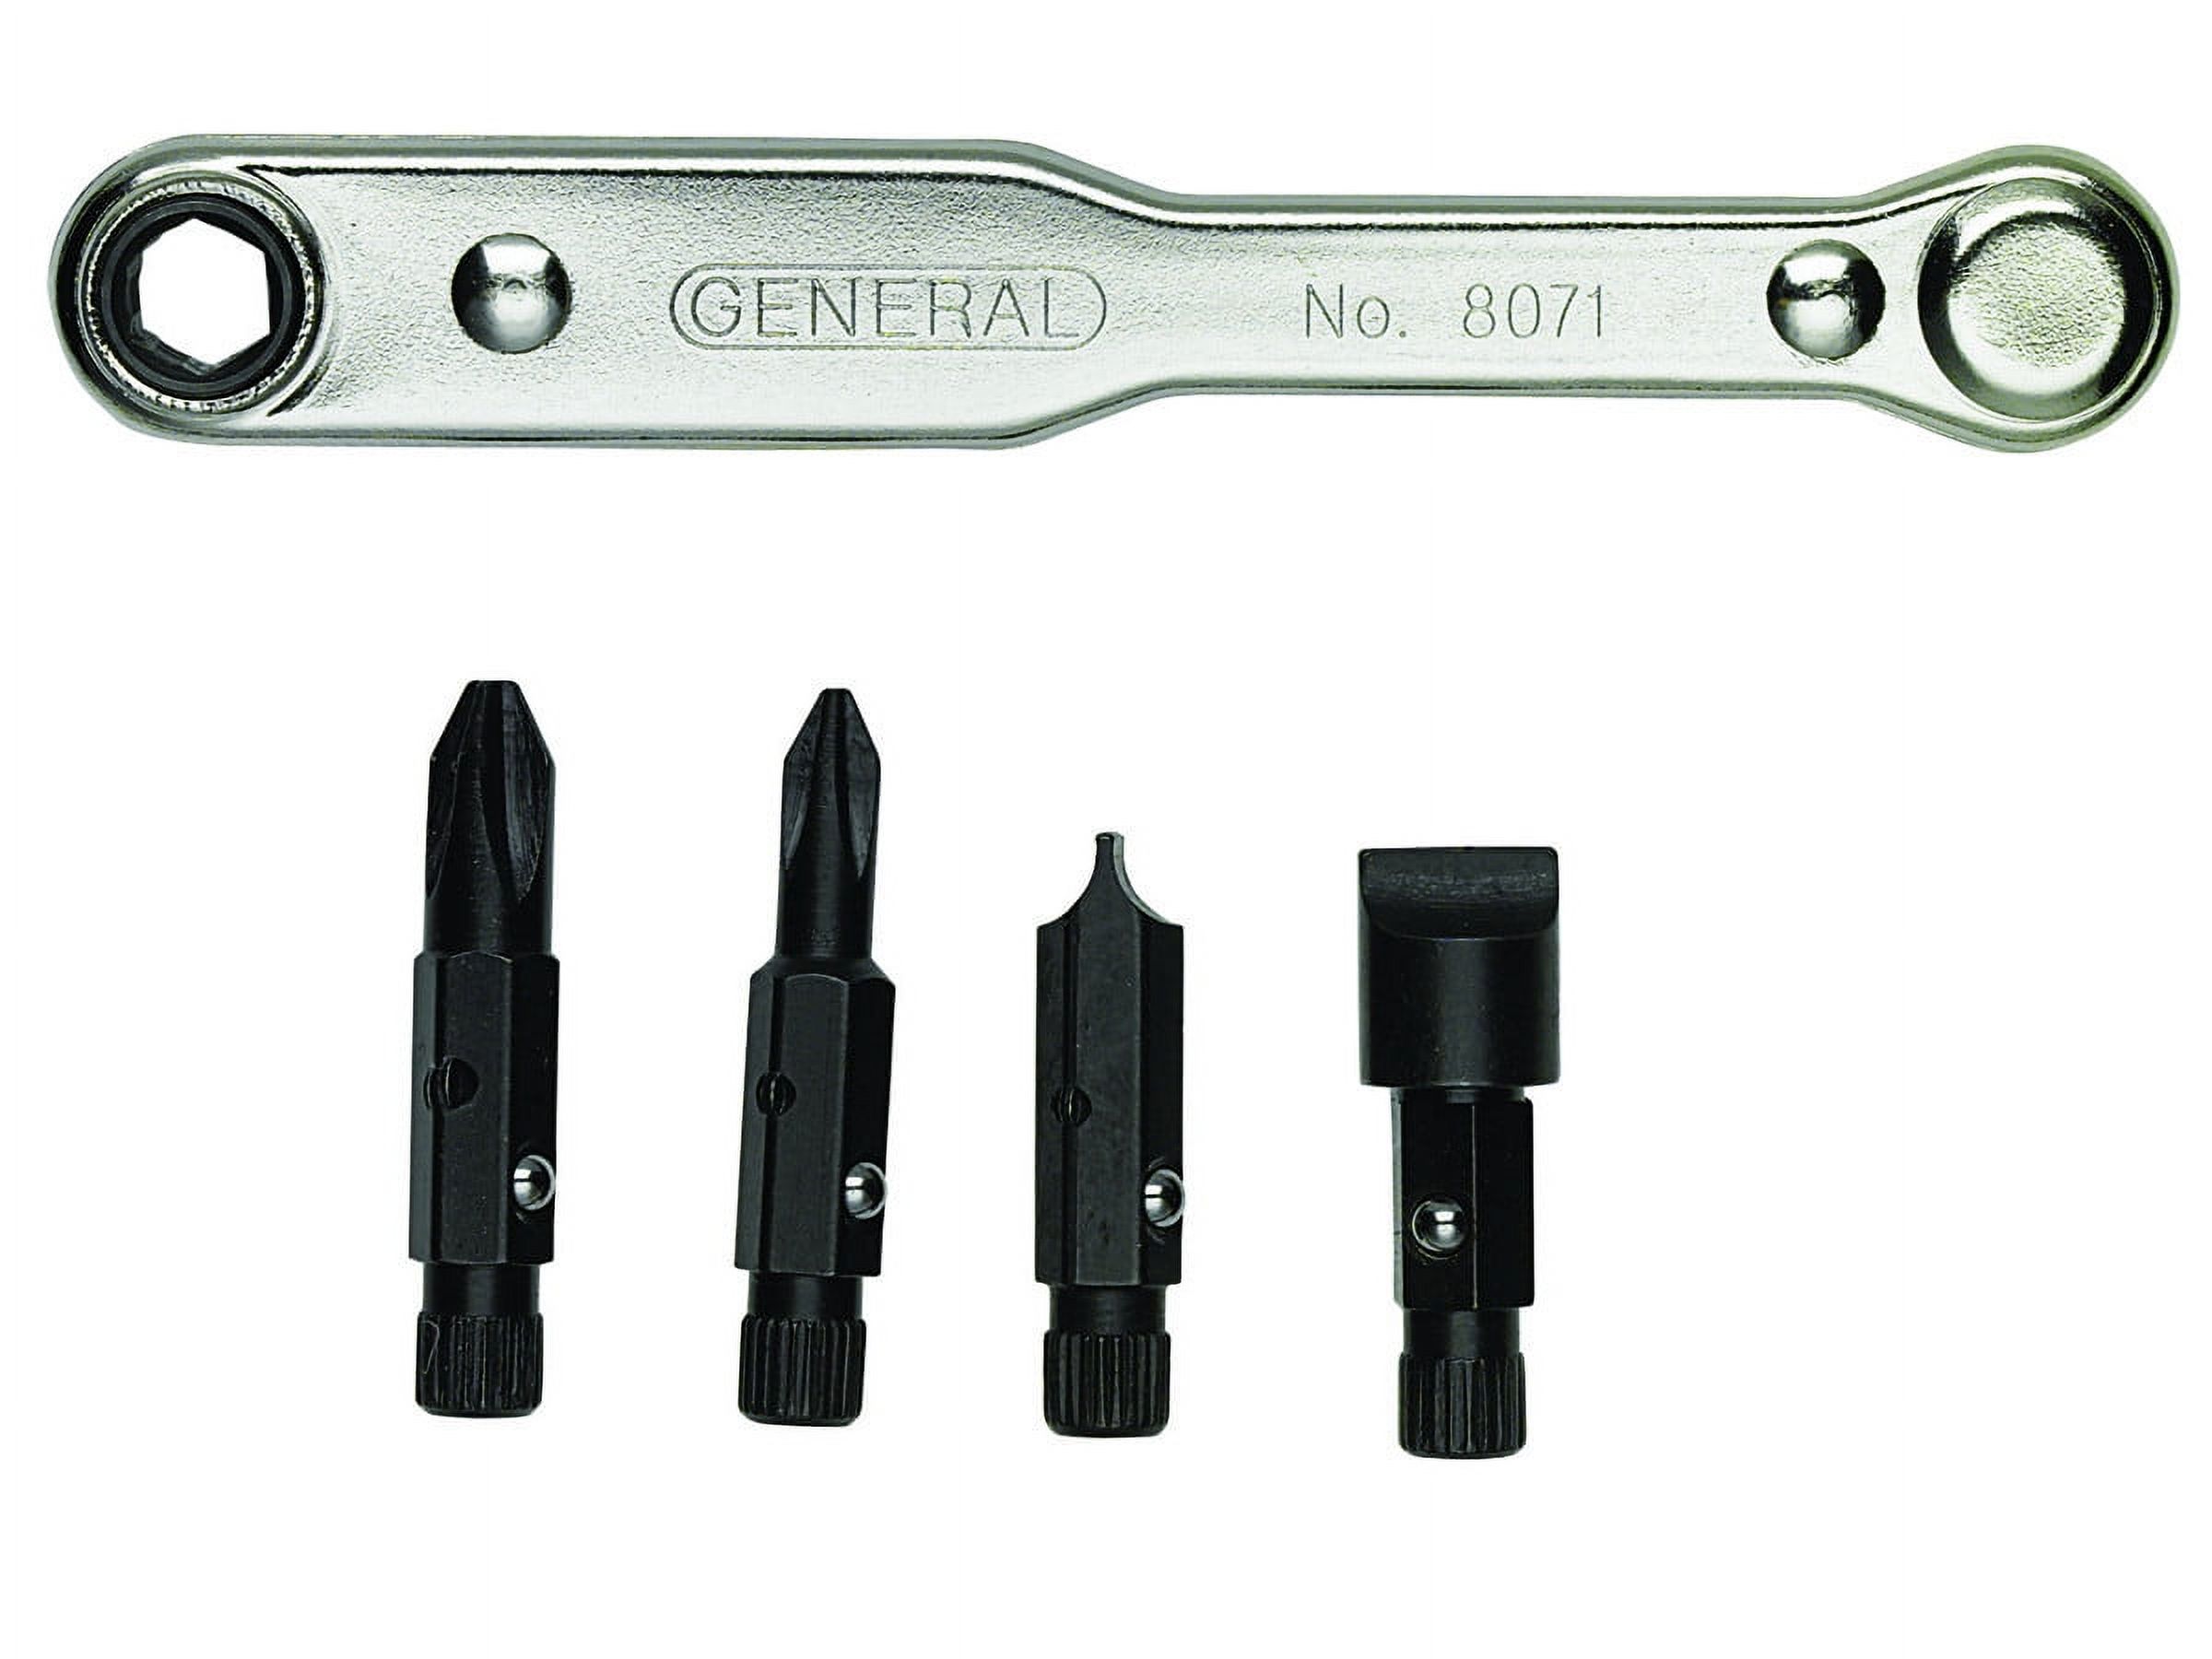 General Tools 8071 Five-Piece Ratchet Offset Screwdriver Set with Pass-through Handle - image 1 of 3